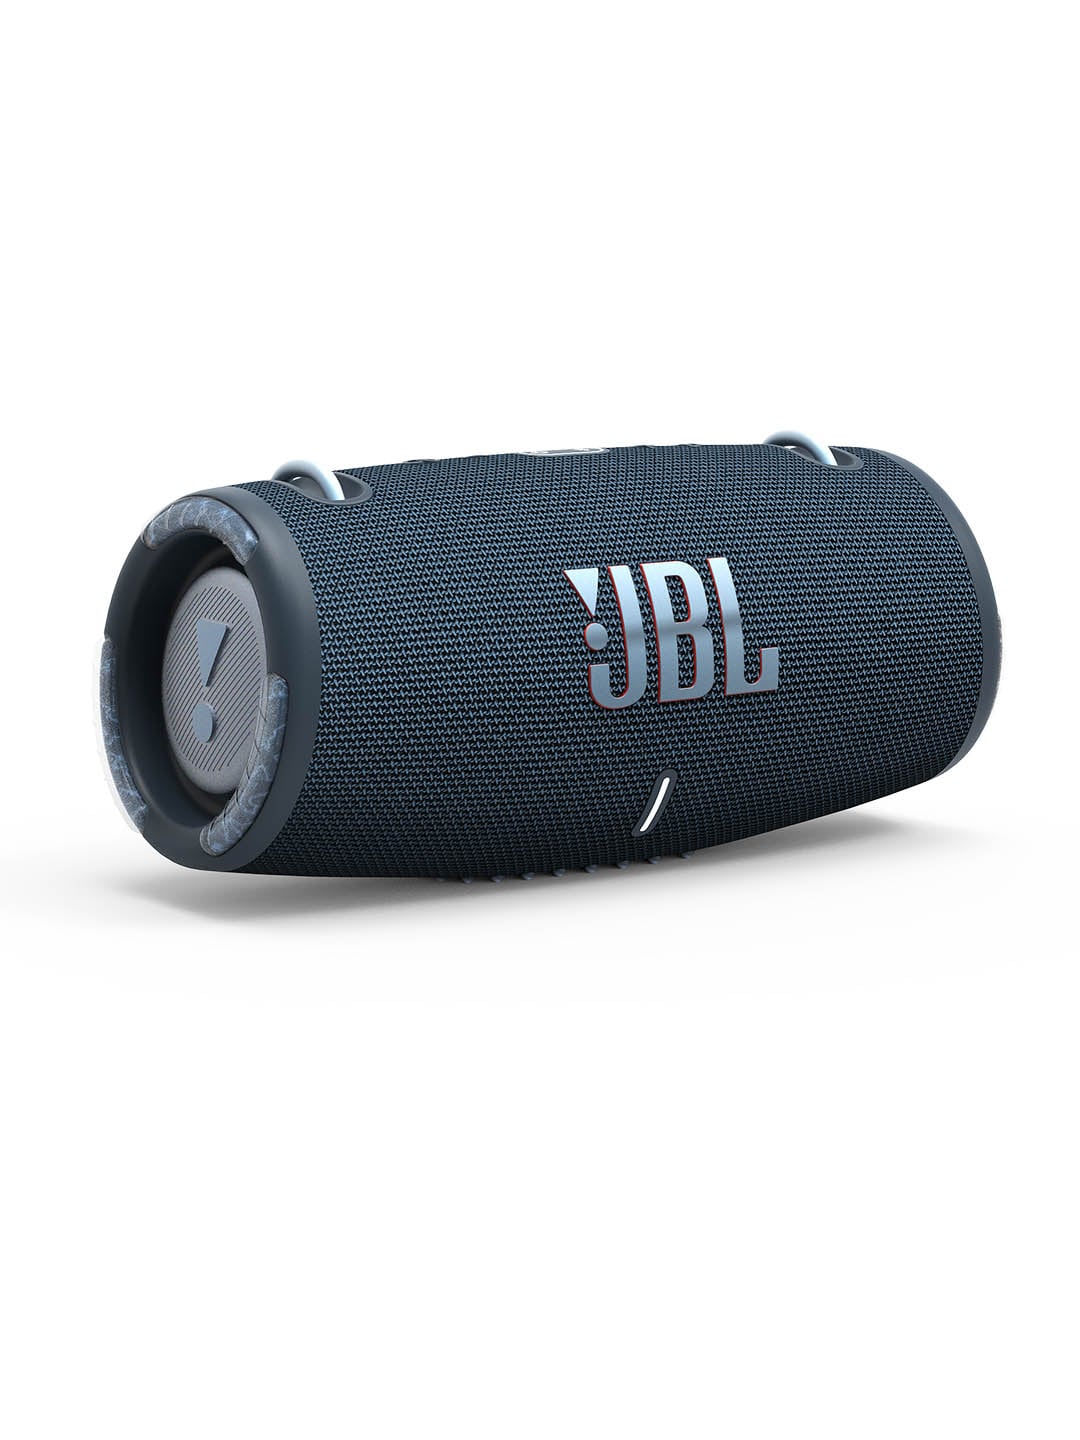 JBL Xtreme 3 Wireless Portable Bluetooth Speaker Without Mic - Blue Price in India